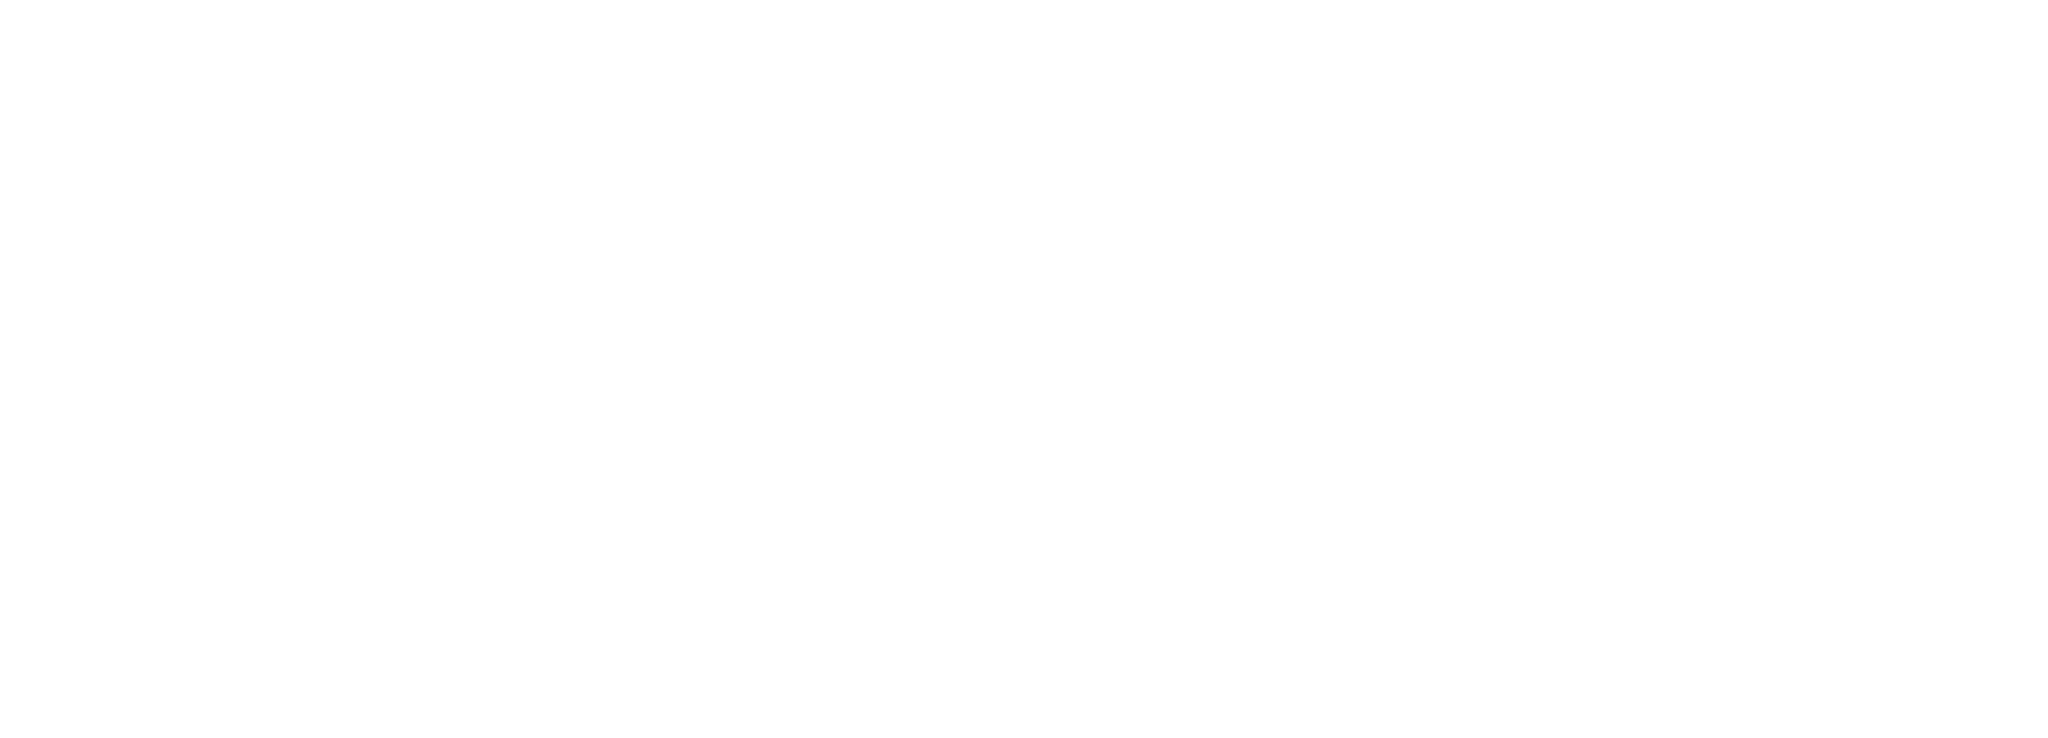 Luxembourg School of Business-BLANCO